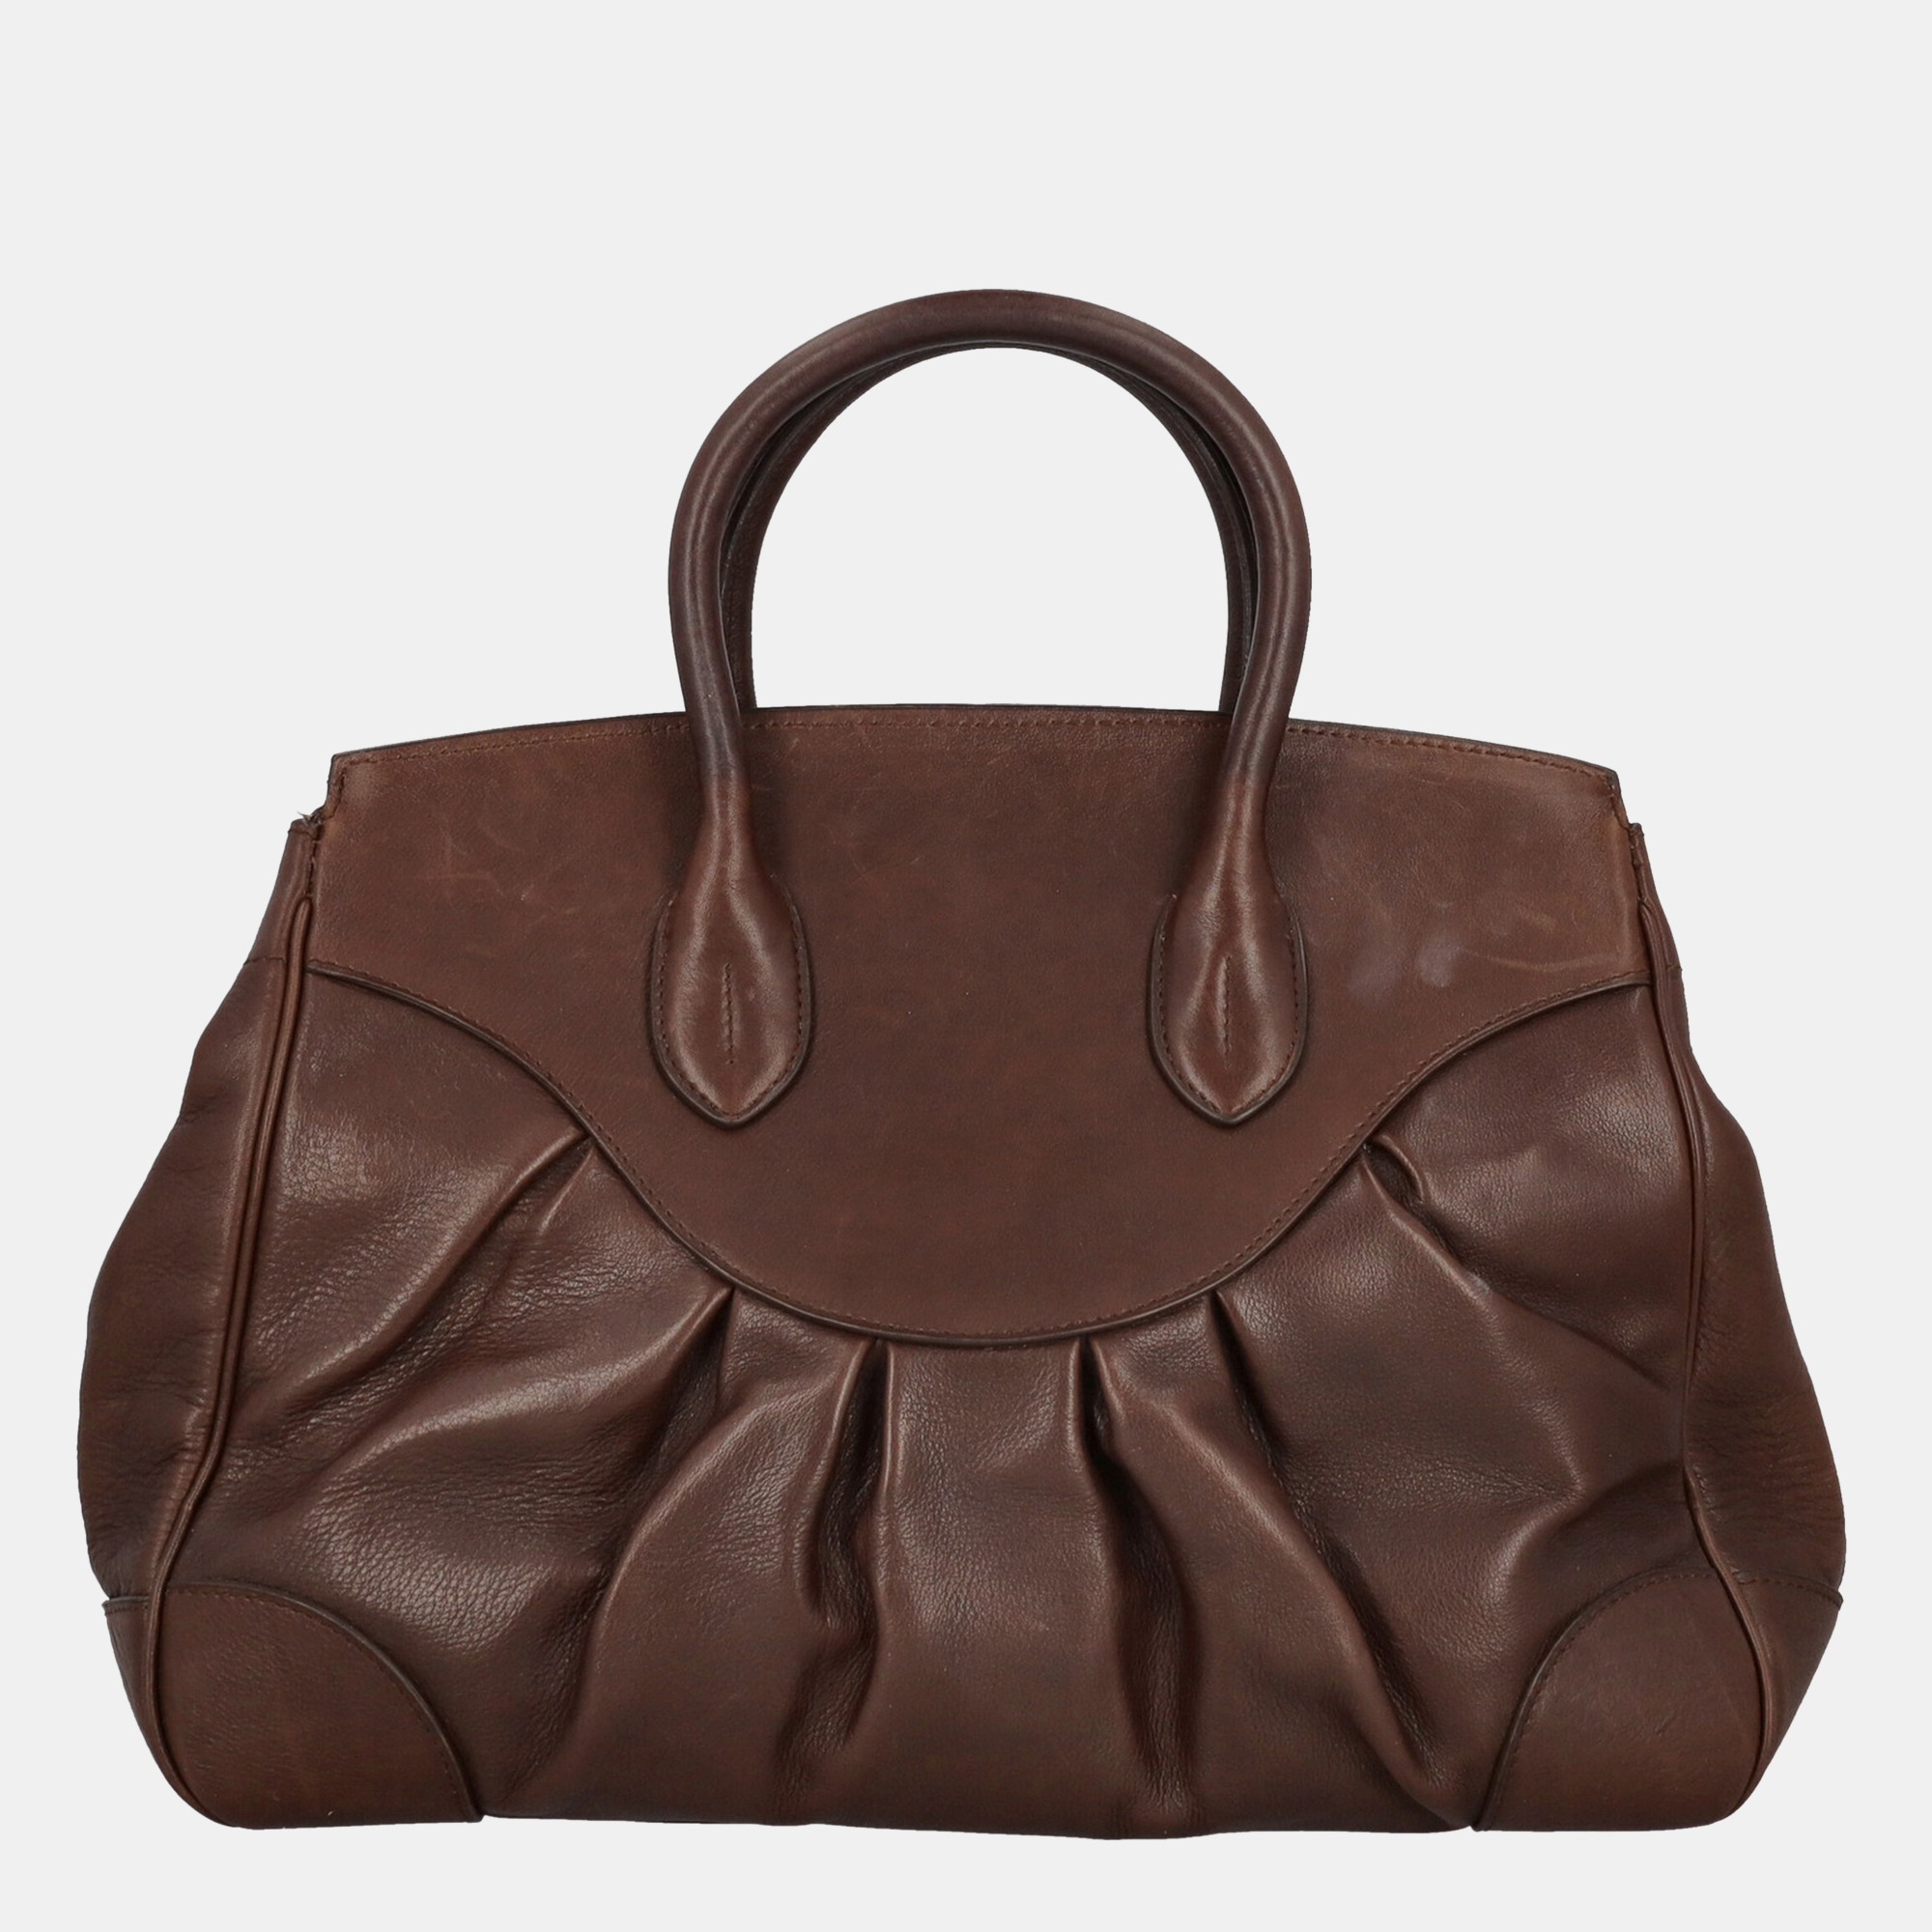 Ralph Lauren  Women's Leather Tote Bag - Brown - One Size